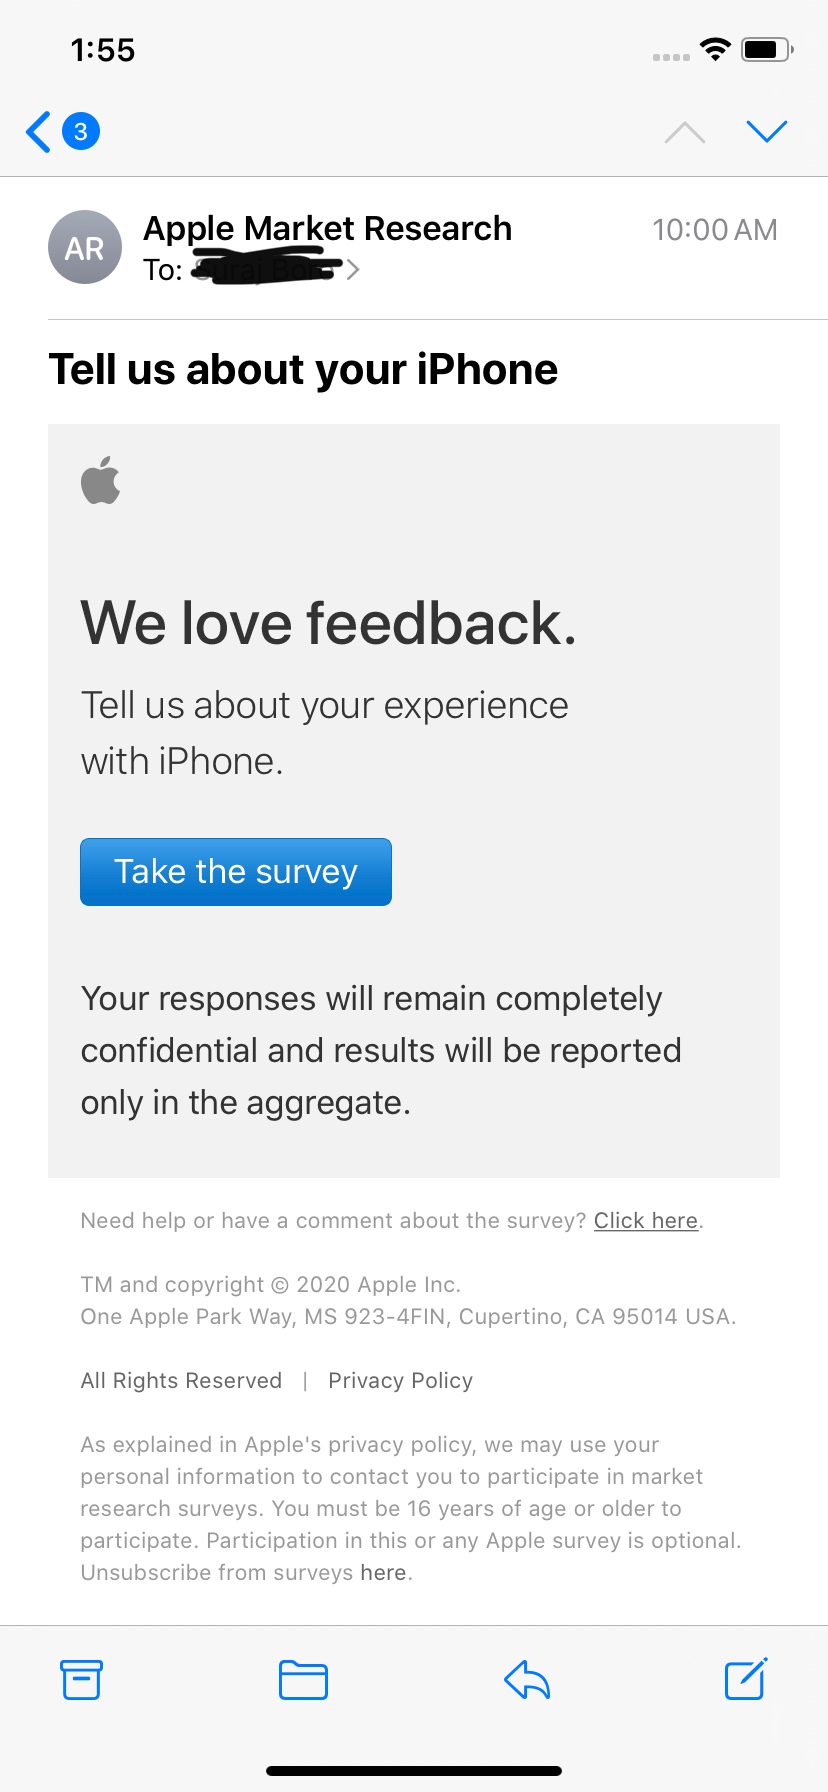 apple market research survey email